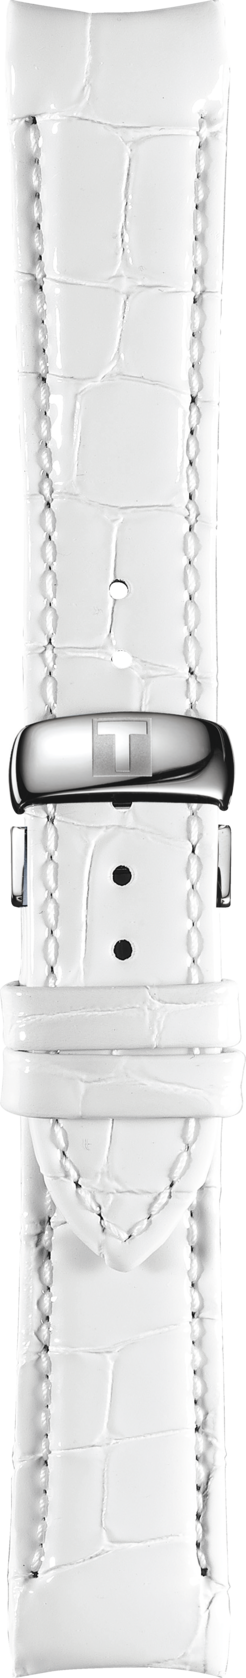 Tissot Couturier T035210A White Leather 18mm Band Strap - WATCHBAND EXPERT